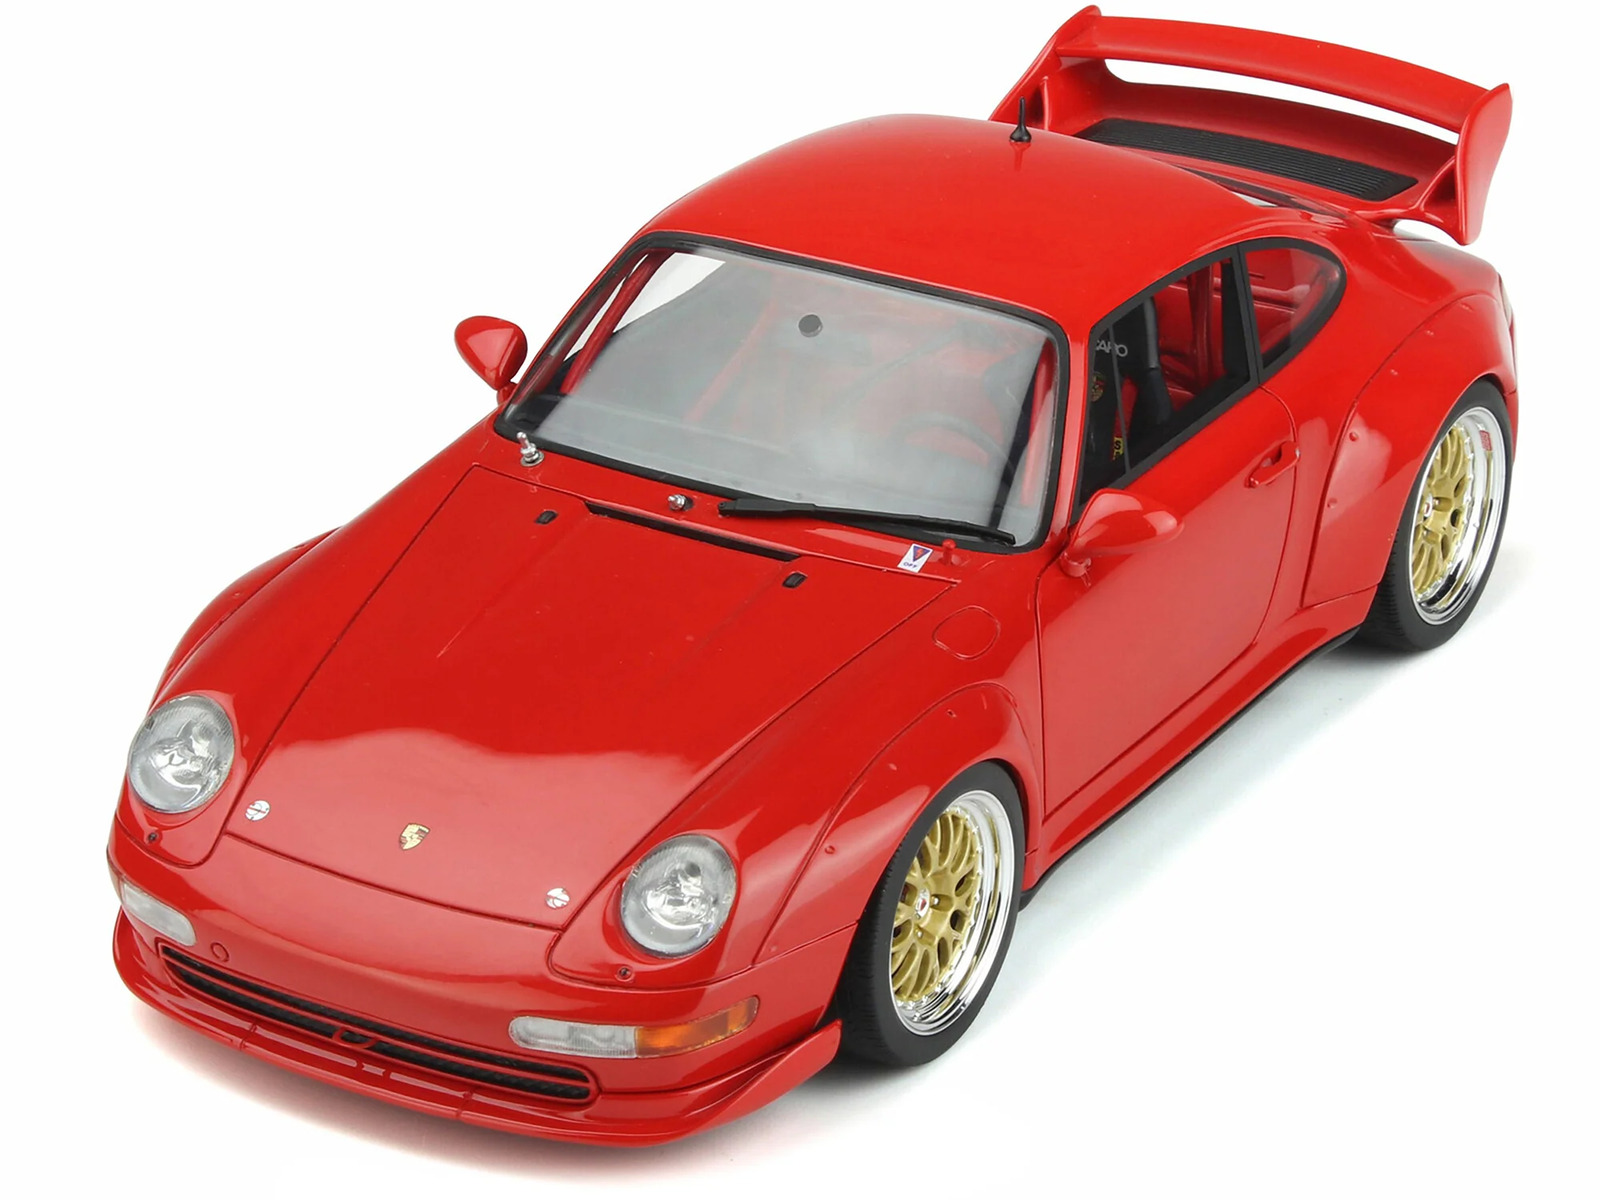 1996 Porsche 911 (993) 3.8 RSR Guards Red with Gold Wheels 1/18 Model Car